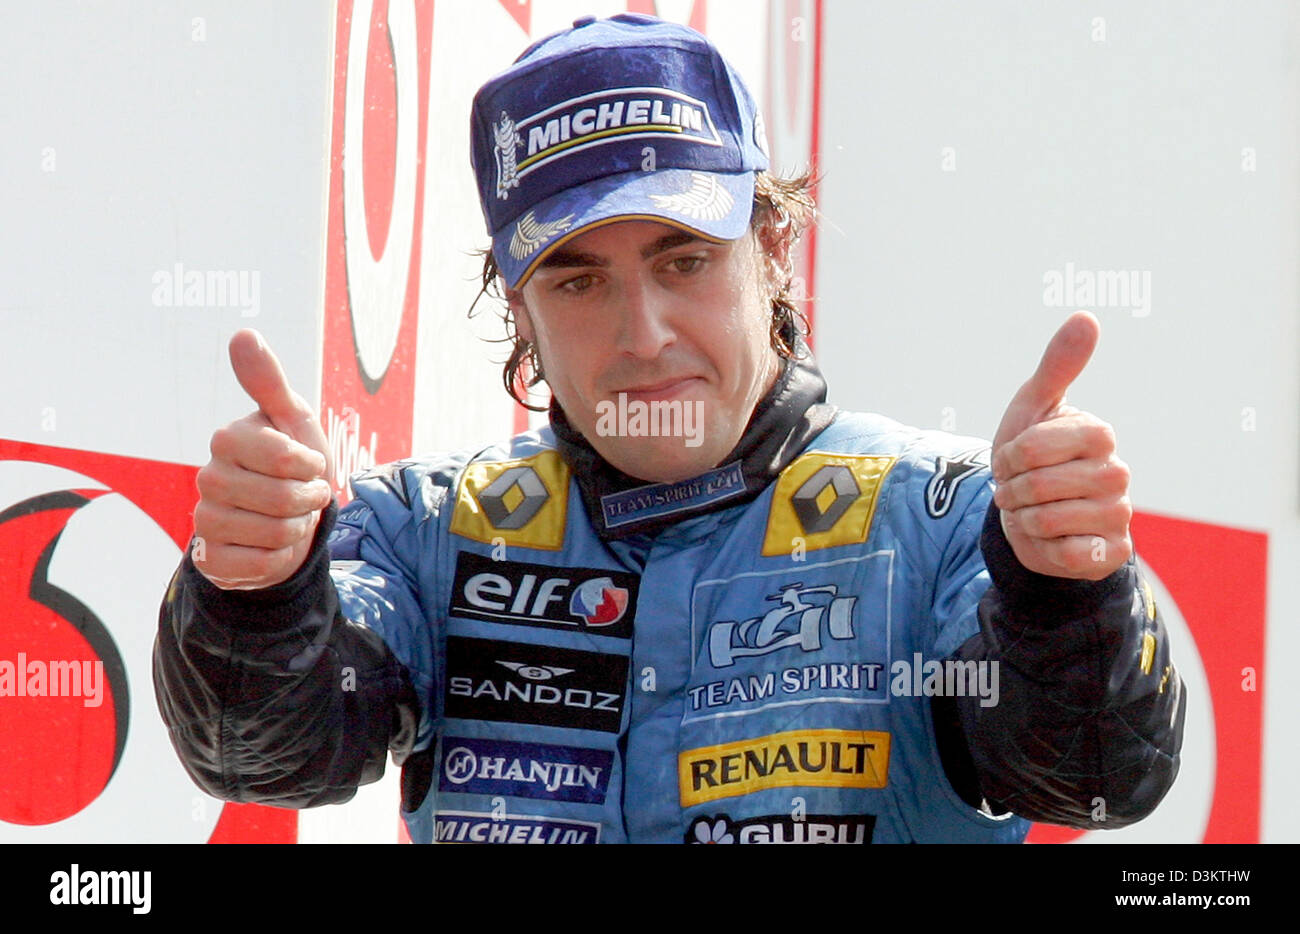 Spanish Formula One driver Fernando Alonso (Renault) reacts on the podium after the Grand Prix of Italy at the Italian Grand Prix track in Monza, Italy, Sunday 04 September 2005. Alonso came in second after Columbian Juan Pablo Montoya of McLaren Mercedes who won ahead of Fernando Alonso and Giancarlo Fisichella (both Renault). Stock Photo